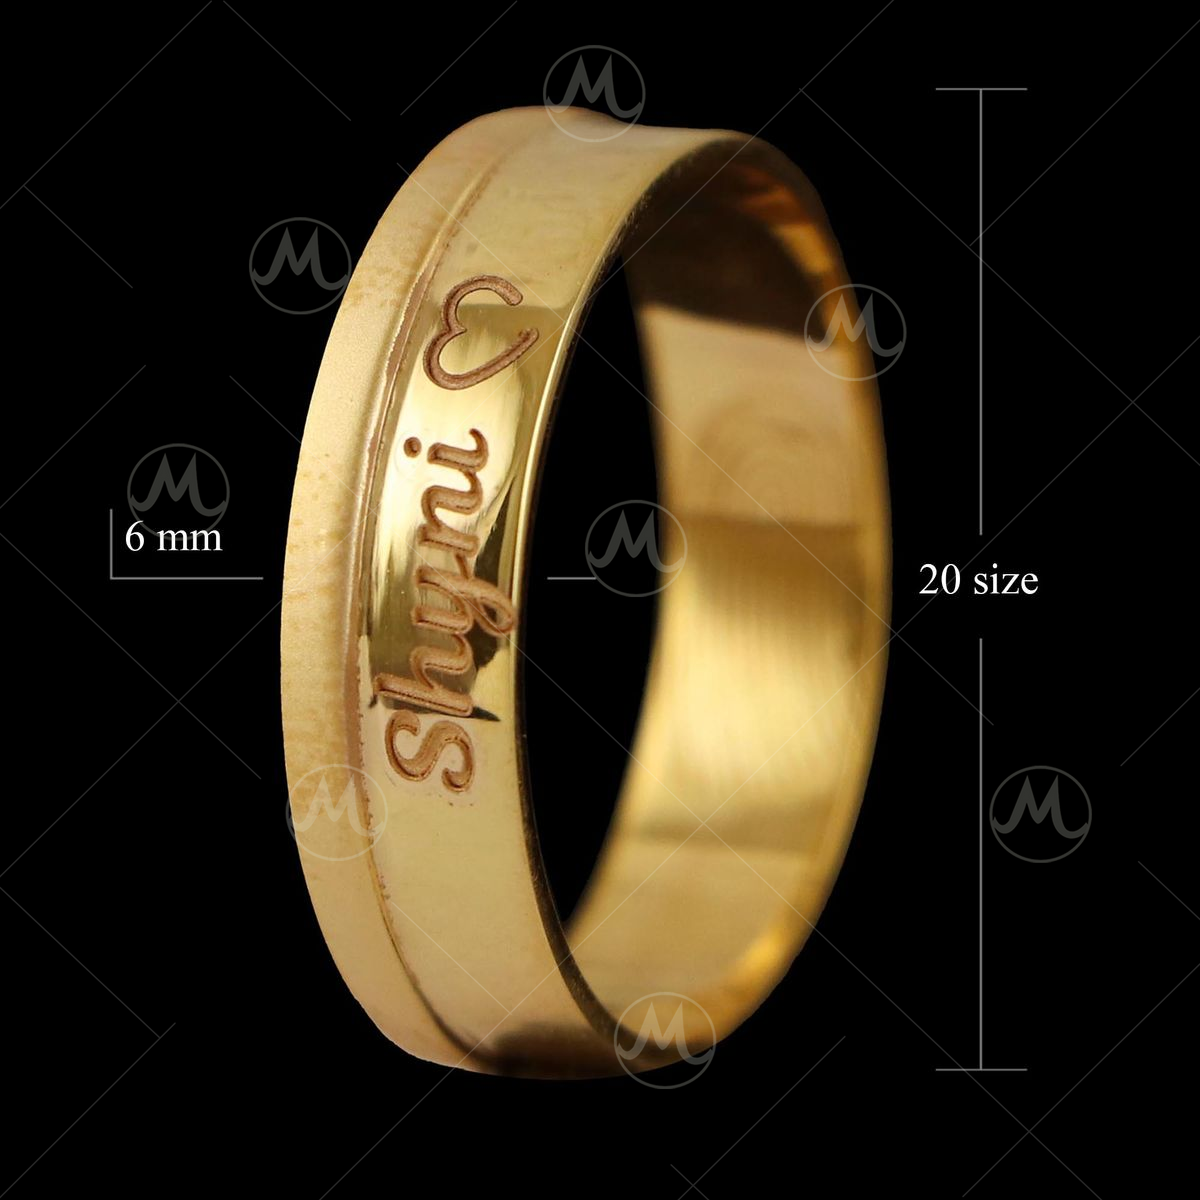 Voice Engraved Wedding Rings | Couple ring design, Engagement rings couple,  Engraved wedding rings